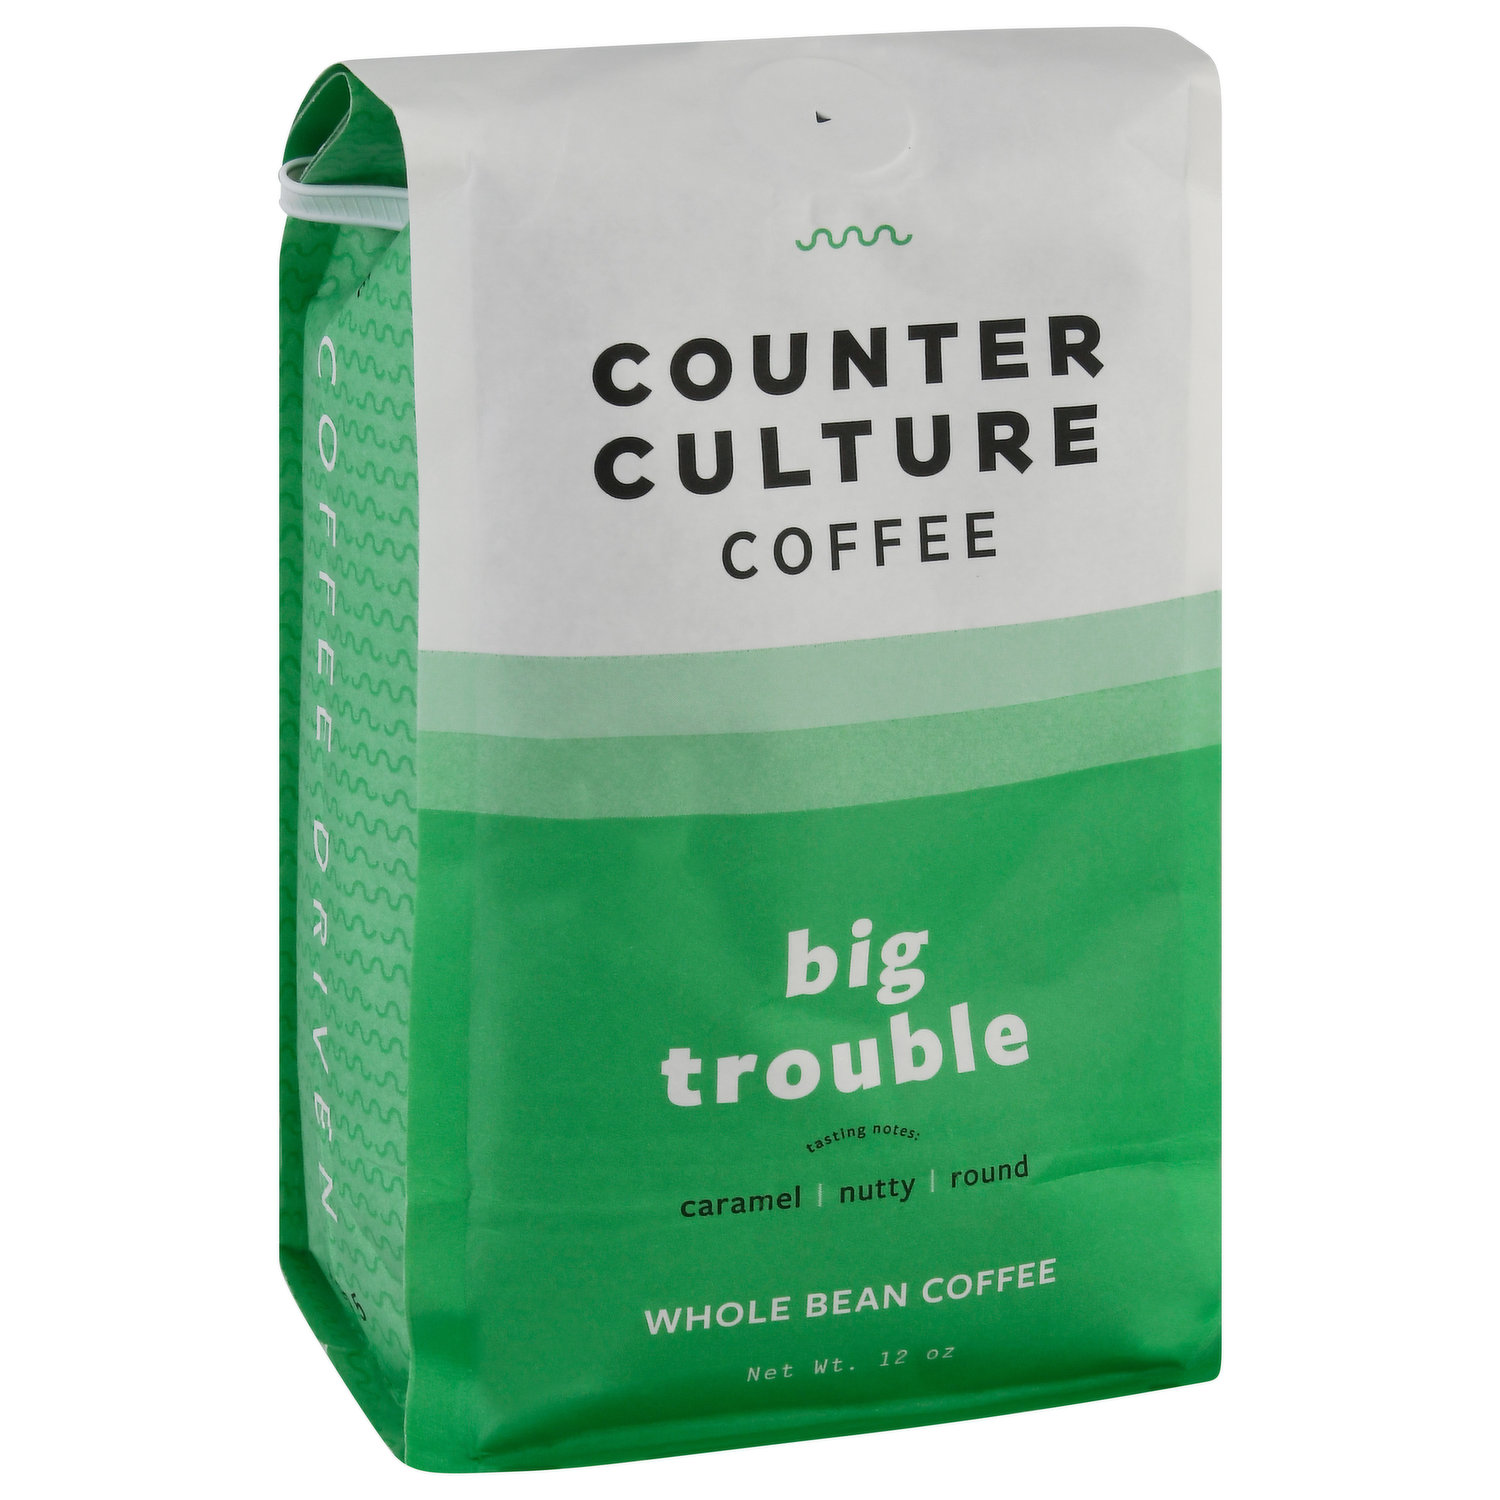 Counter Culture Coffee Big Trouble Whole Bean Coffee